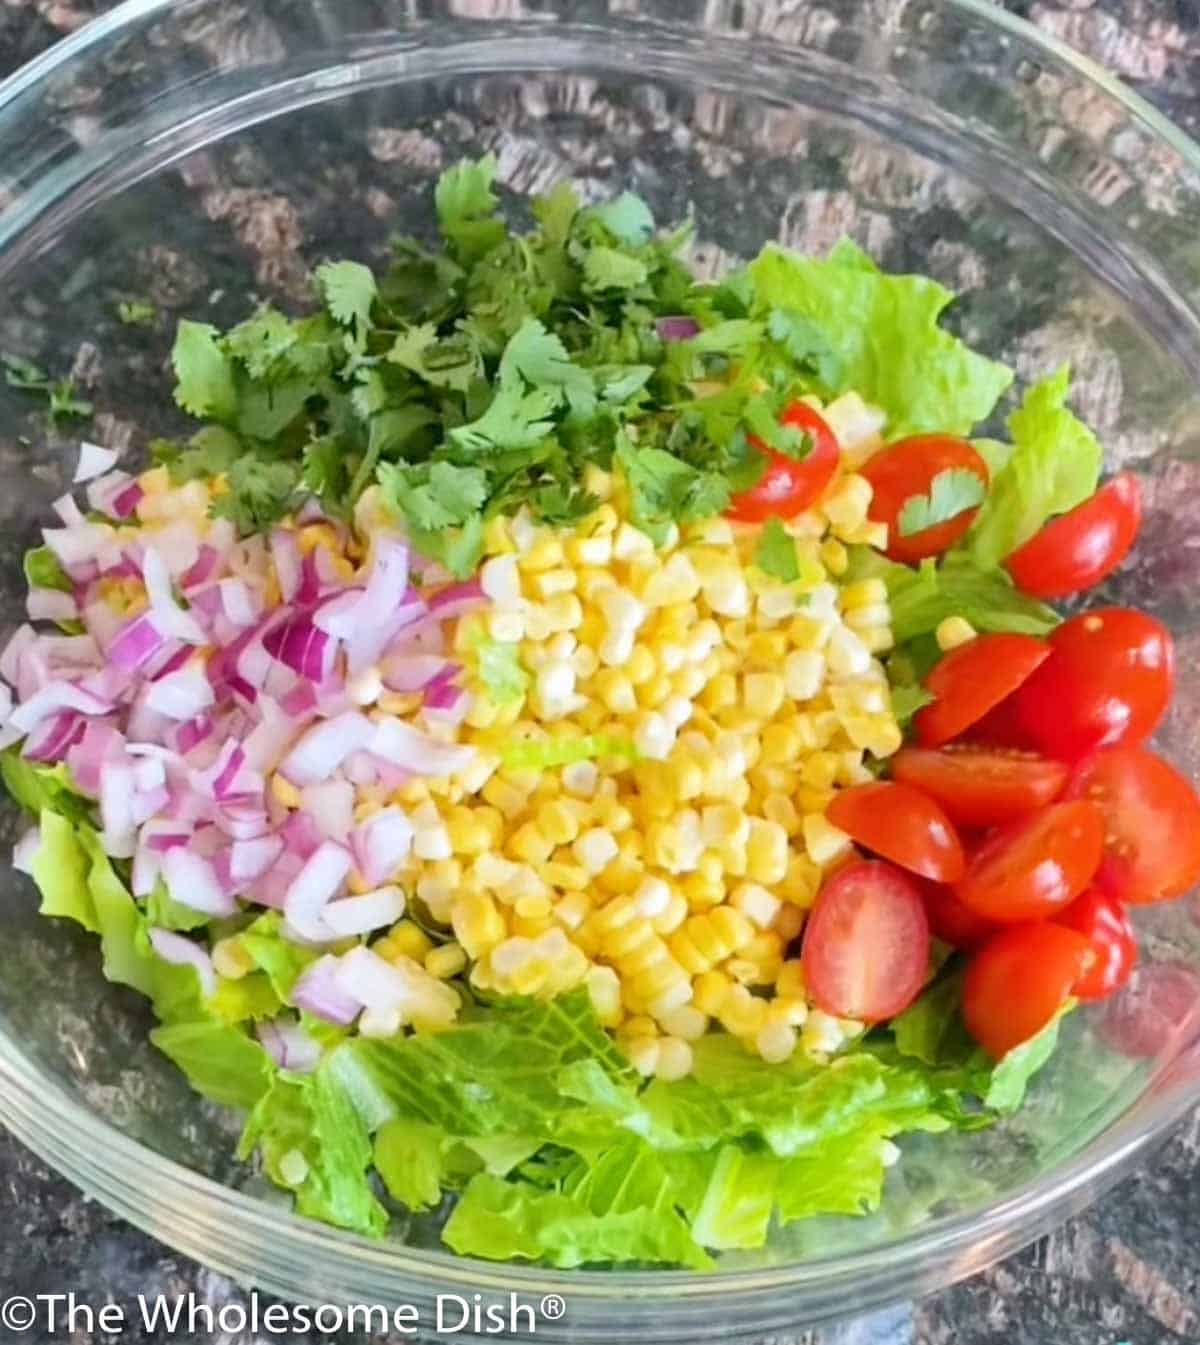 Bowl of chopped lettuce, corn kernels, red onion, and tomatoes.